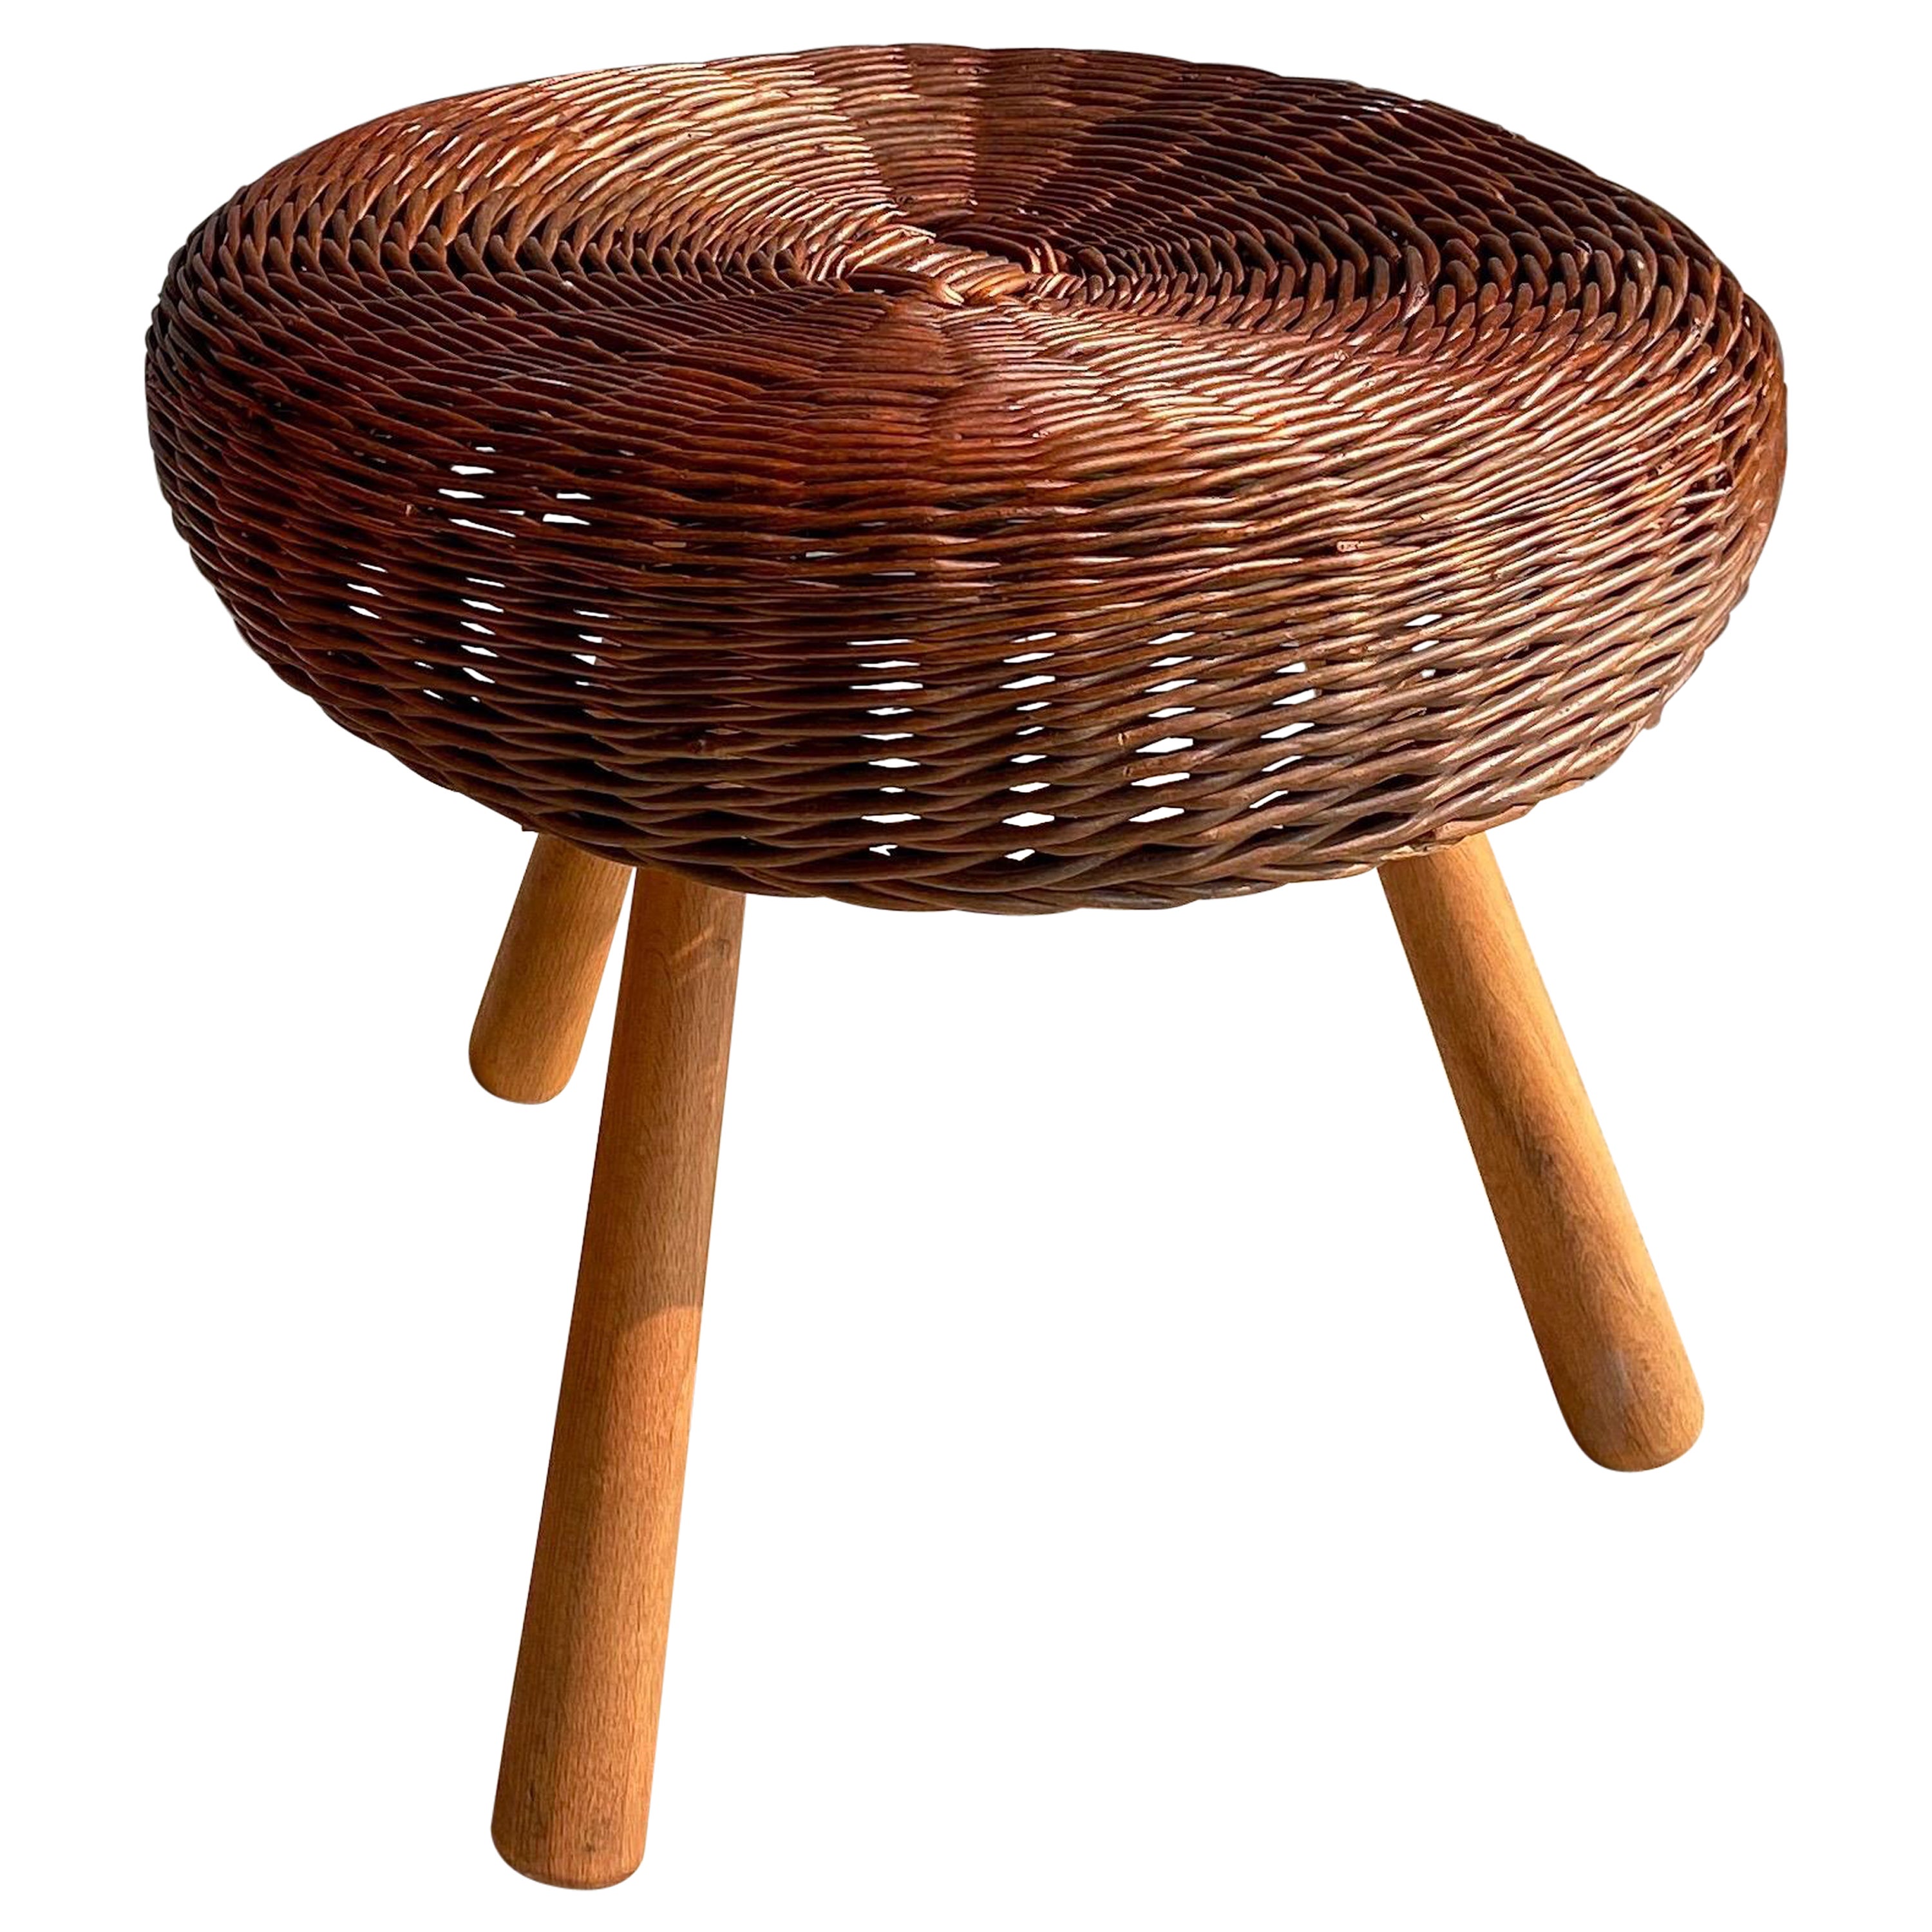 Large Rattan and Wood Stool Attributed to Tony Paul